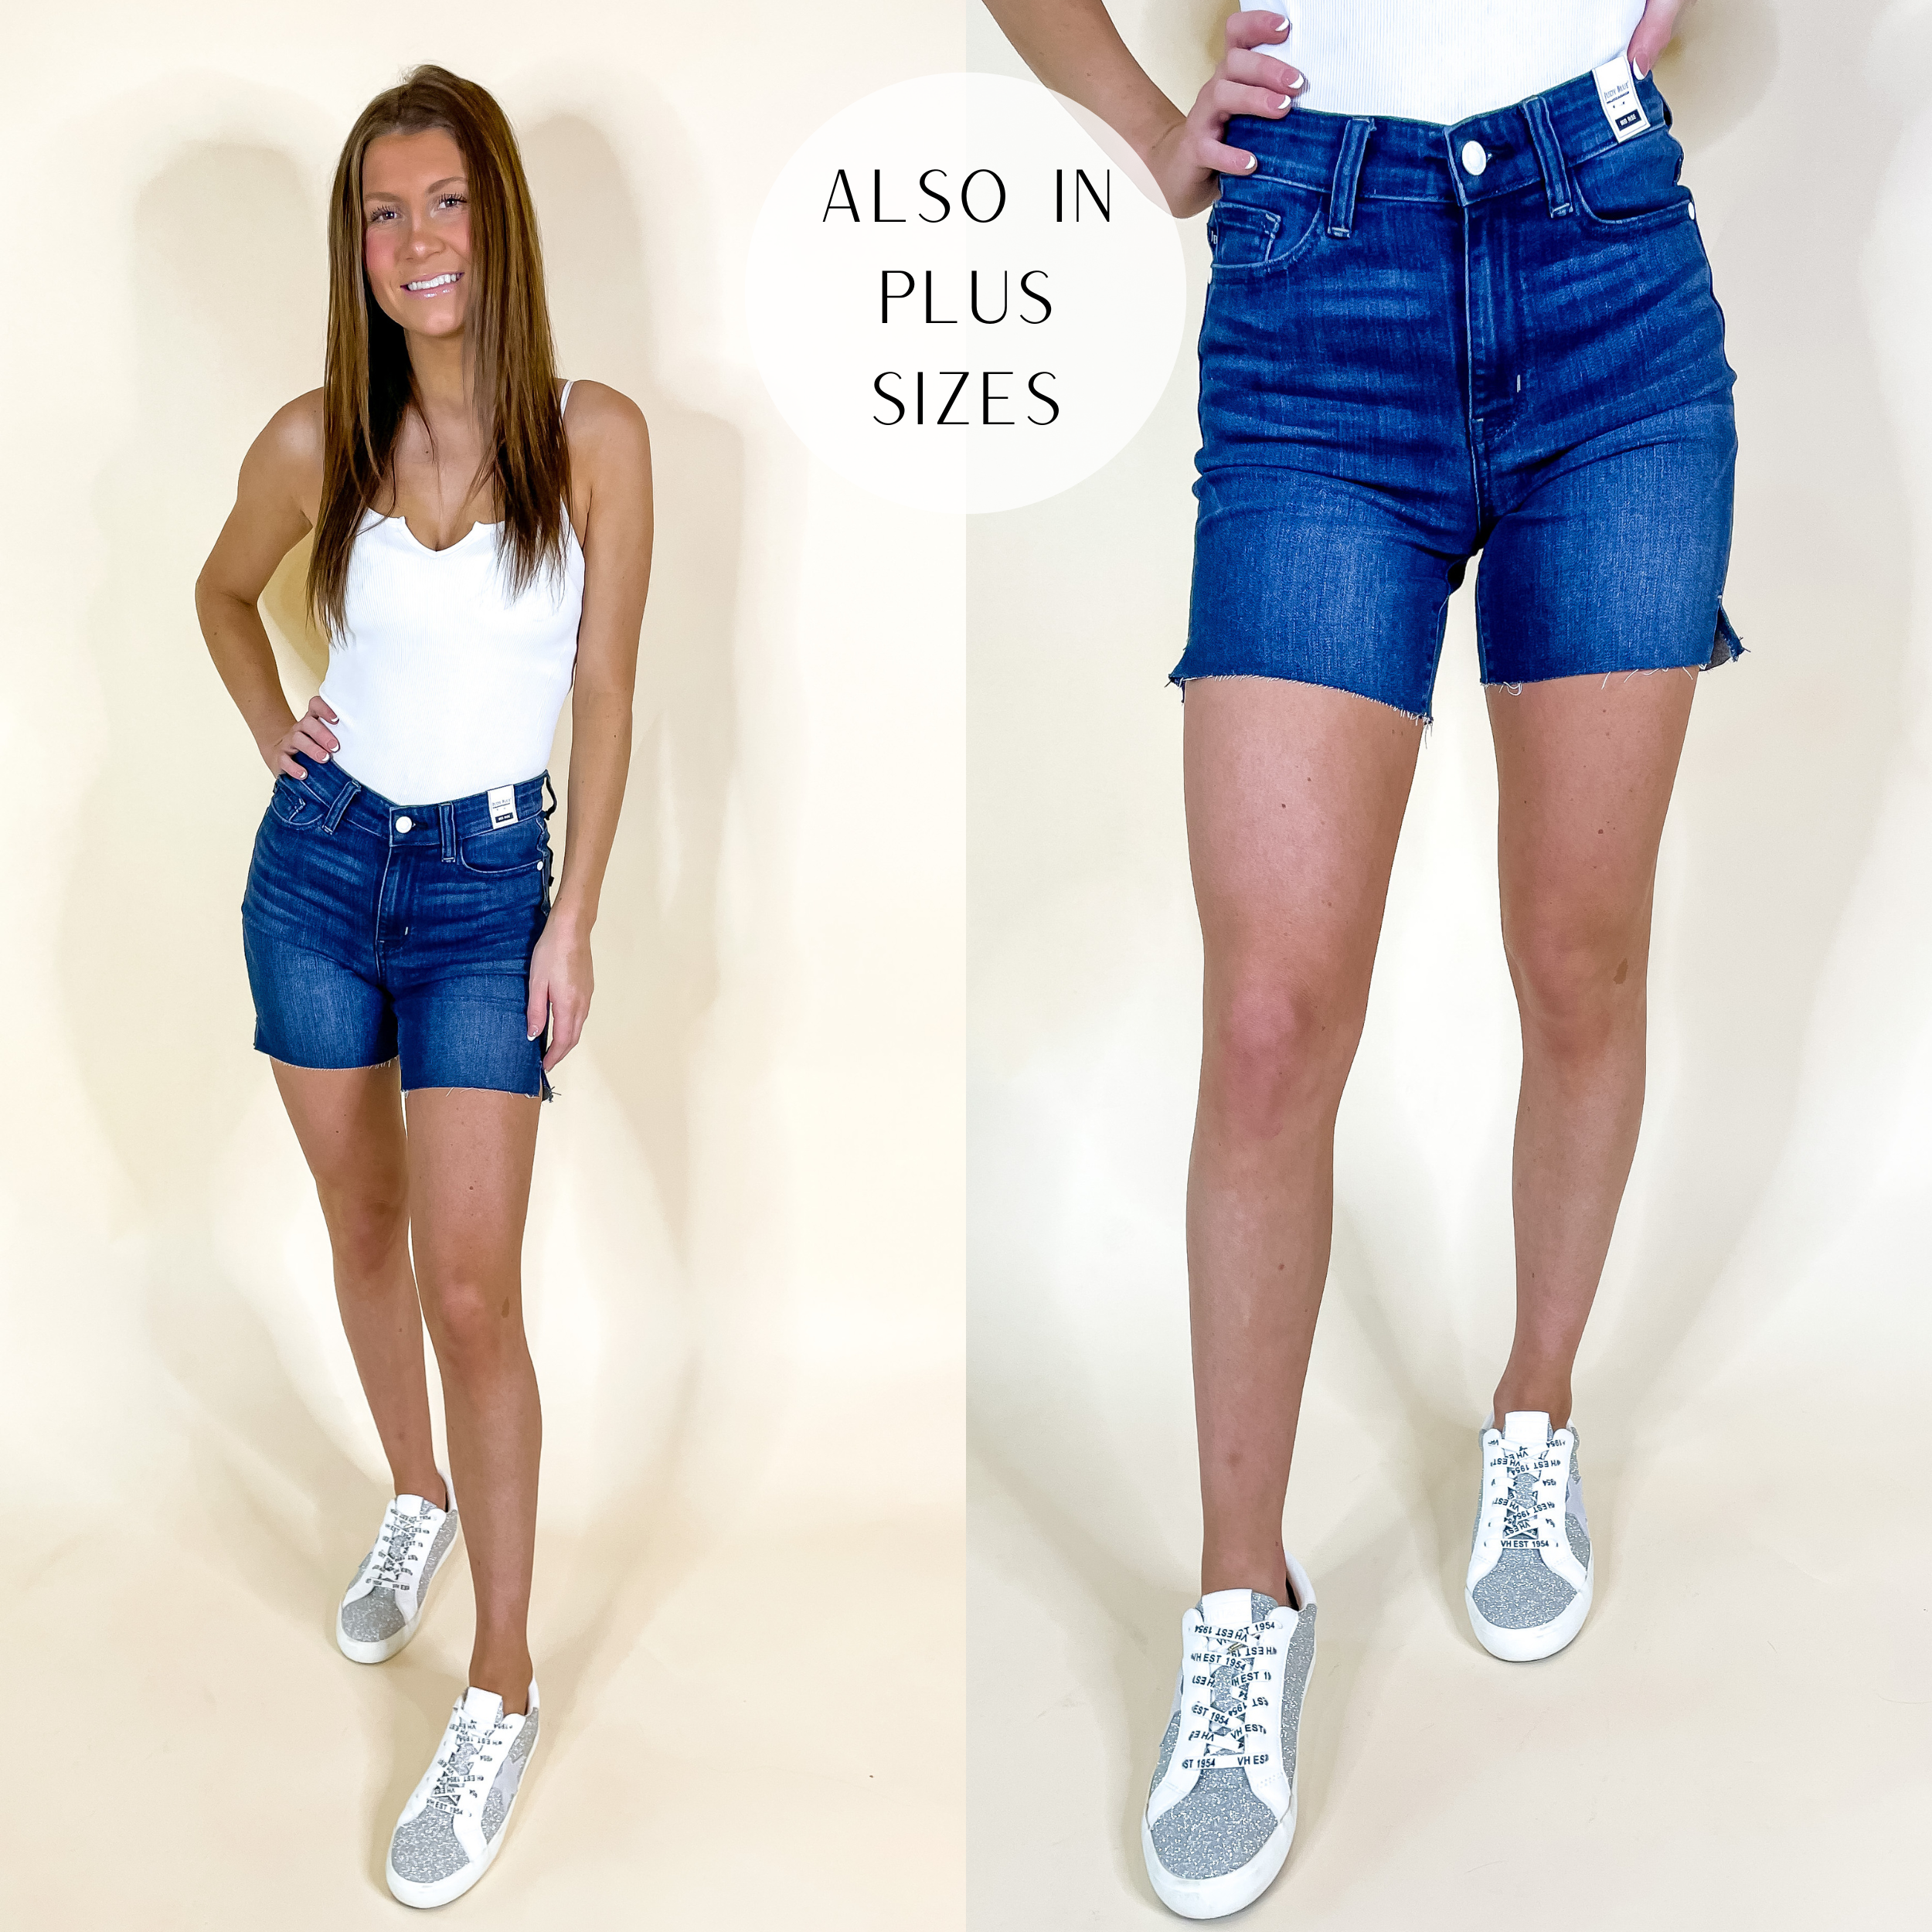 Model is wearing a pair of dark wash denim shorts with a raw hem and a mid-thigh length. Model has these shorts paired with white sneakers and a white tank top.